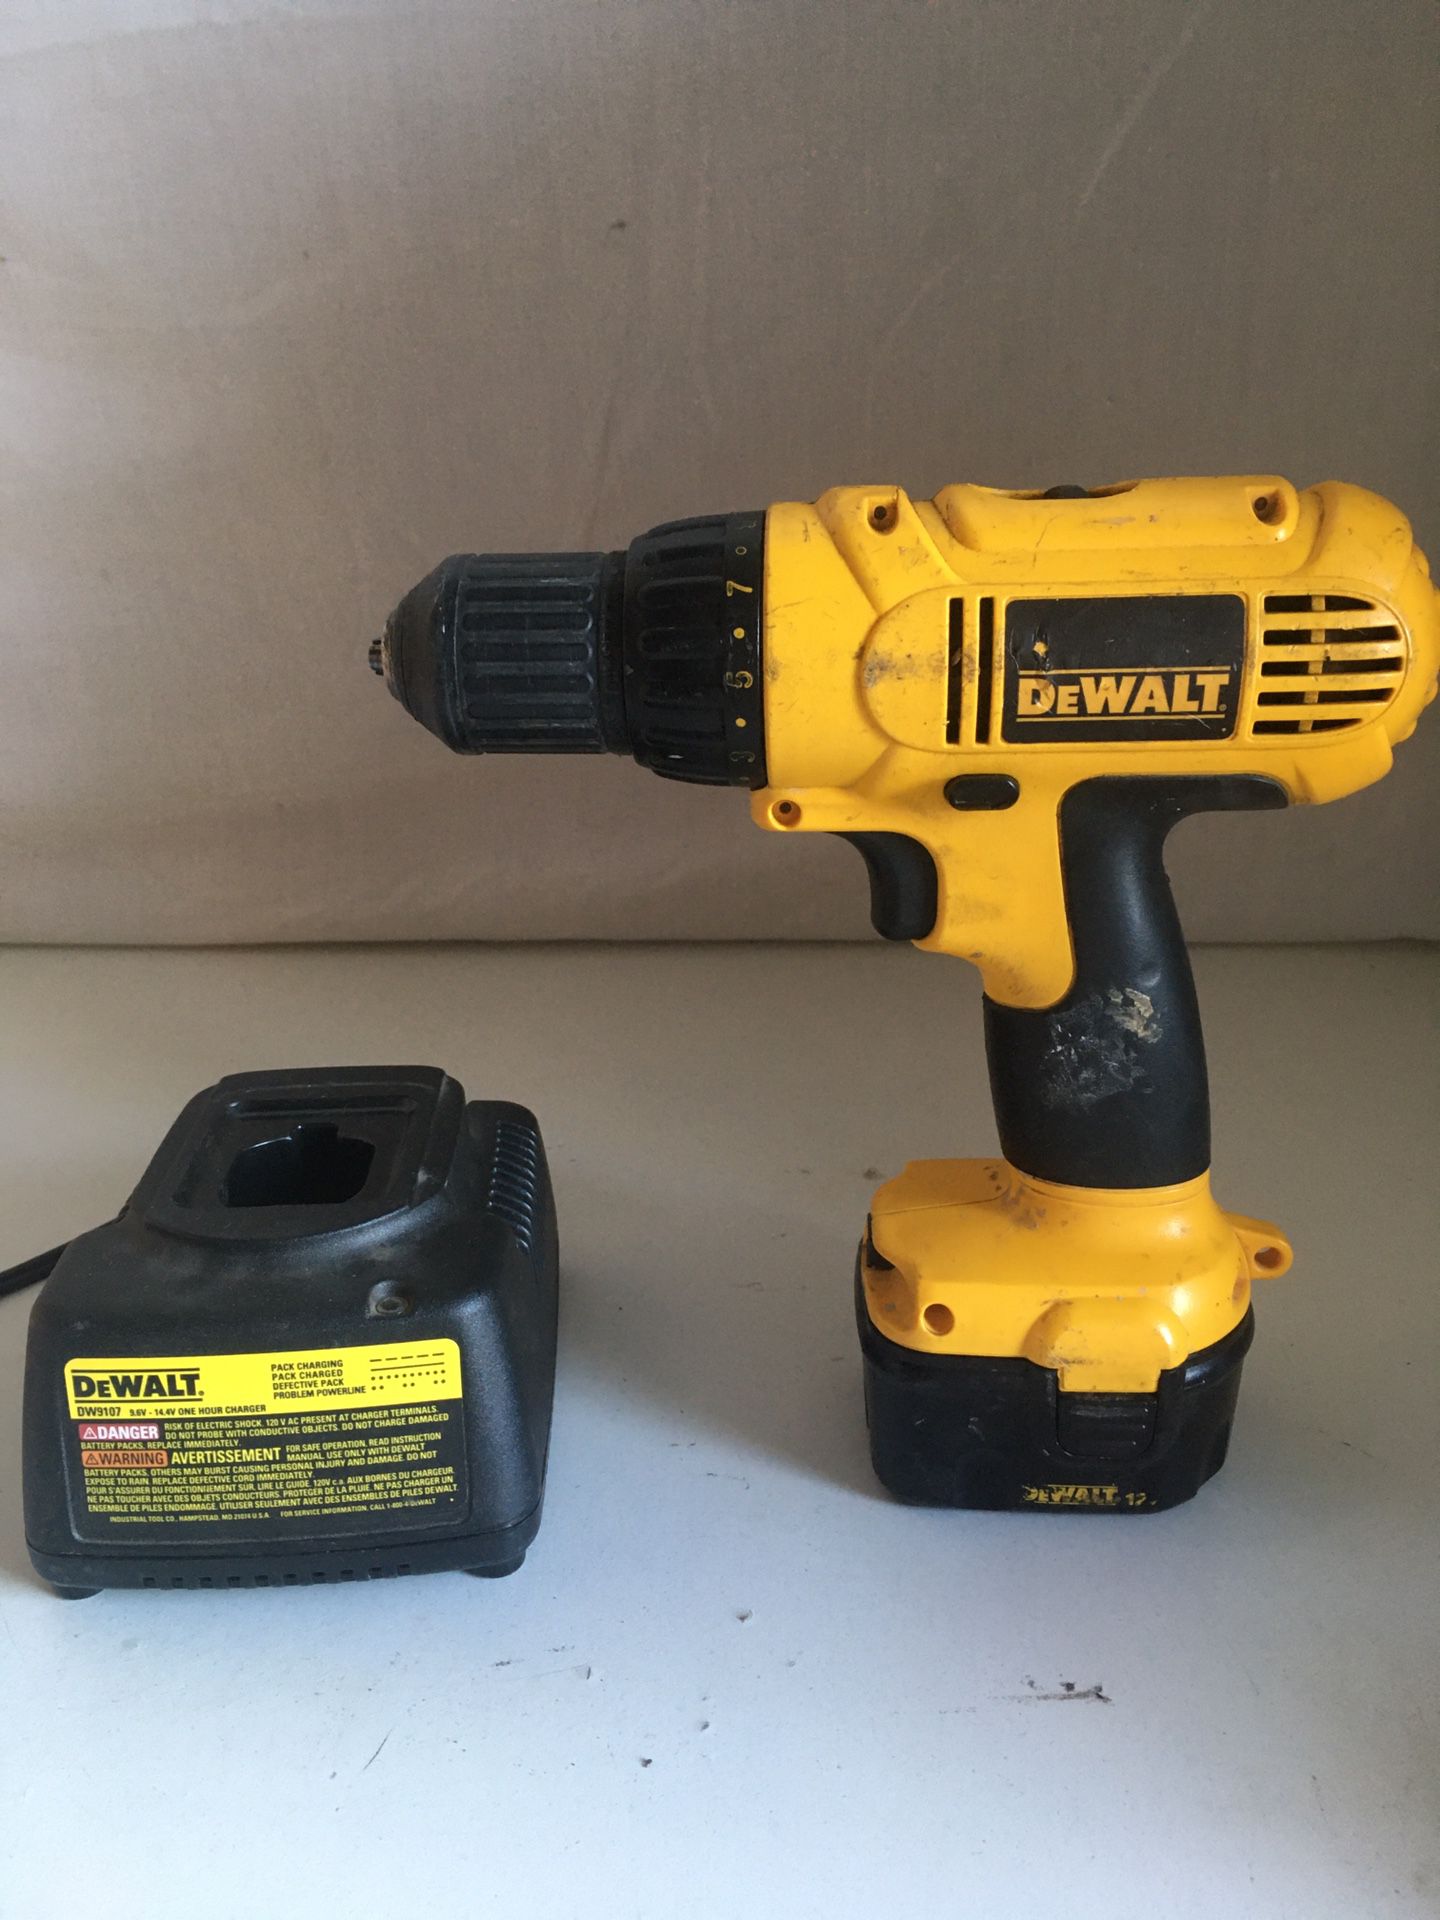 DeWalt DC727 Type 1 DC-727 12V 3/8" VSR 10mm 2-Speed RPM: 0-400/0-1400 Cordless Drill / 39 Tested and working perfectly. Will demonstrate f for Sale in Spring Valley, CA - OfferUp